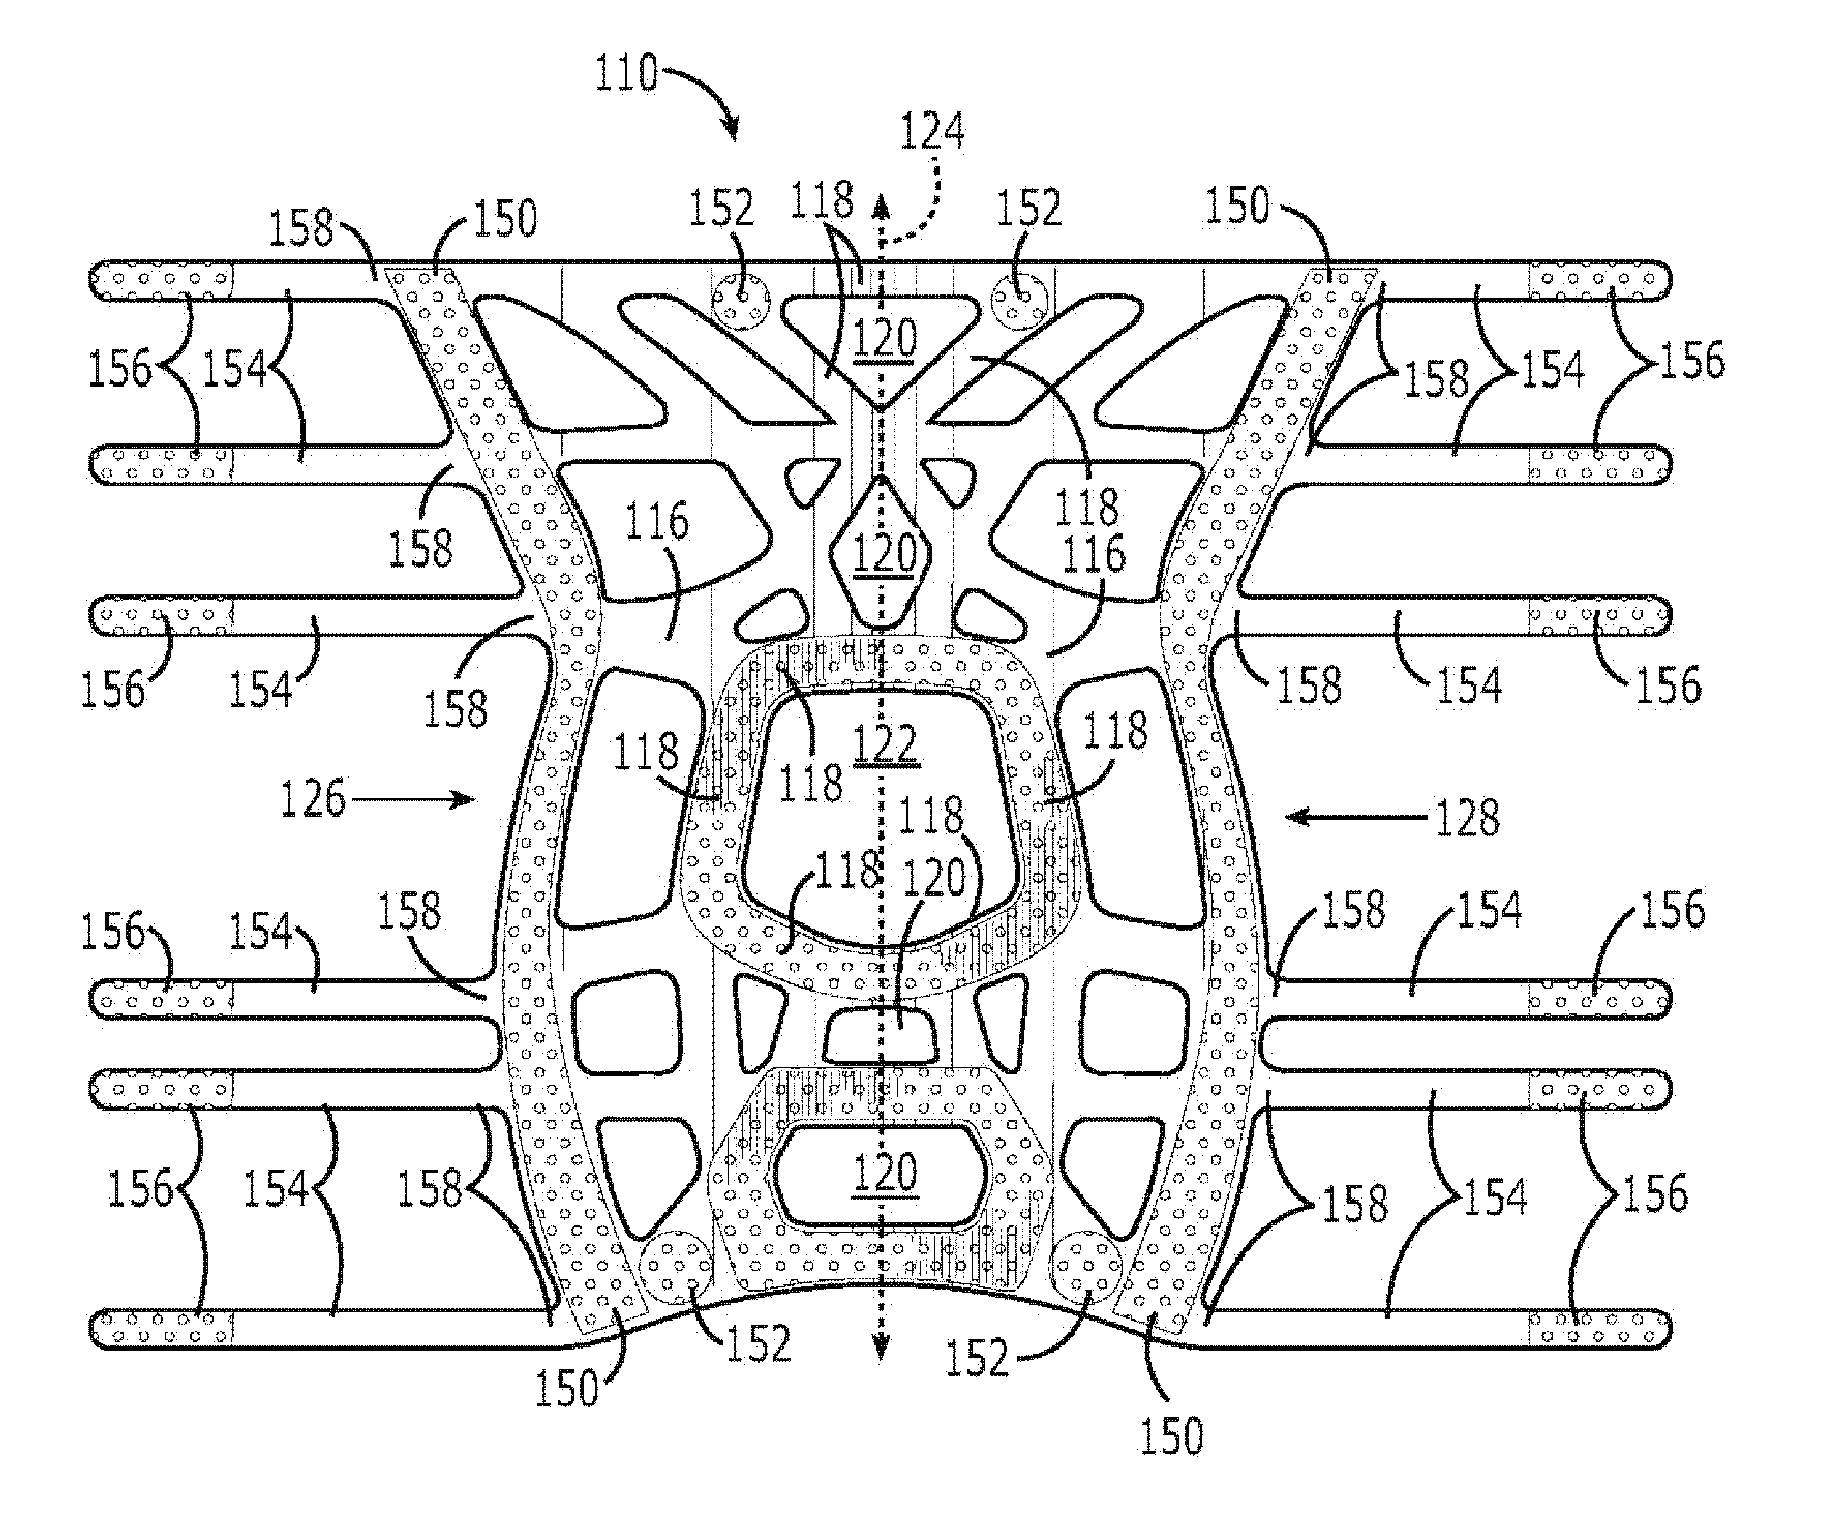 Donning potentiating support with expandable framework spanning hinge joint